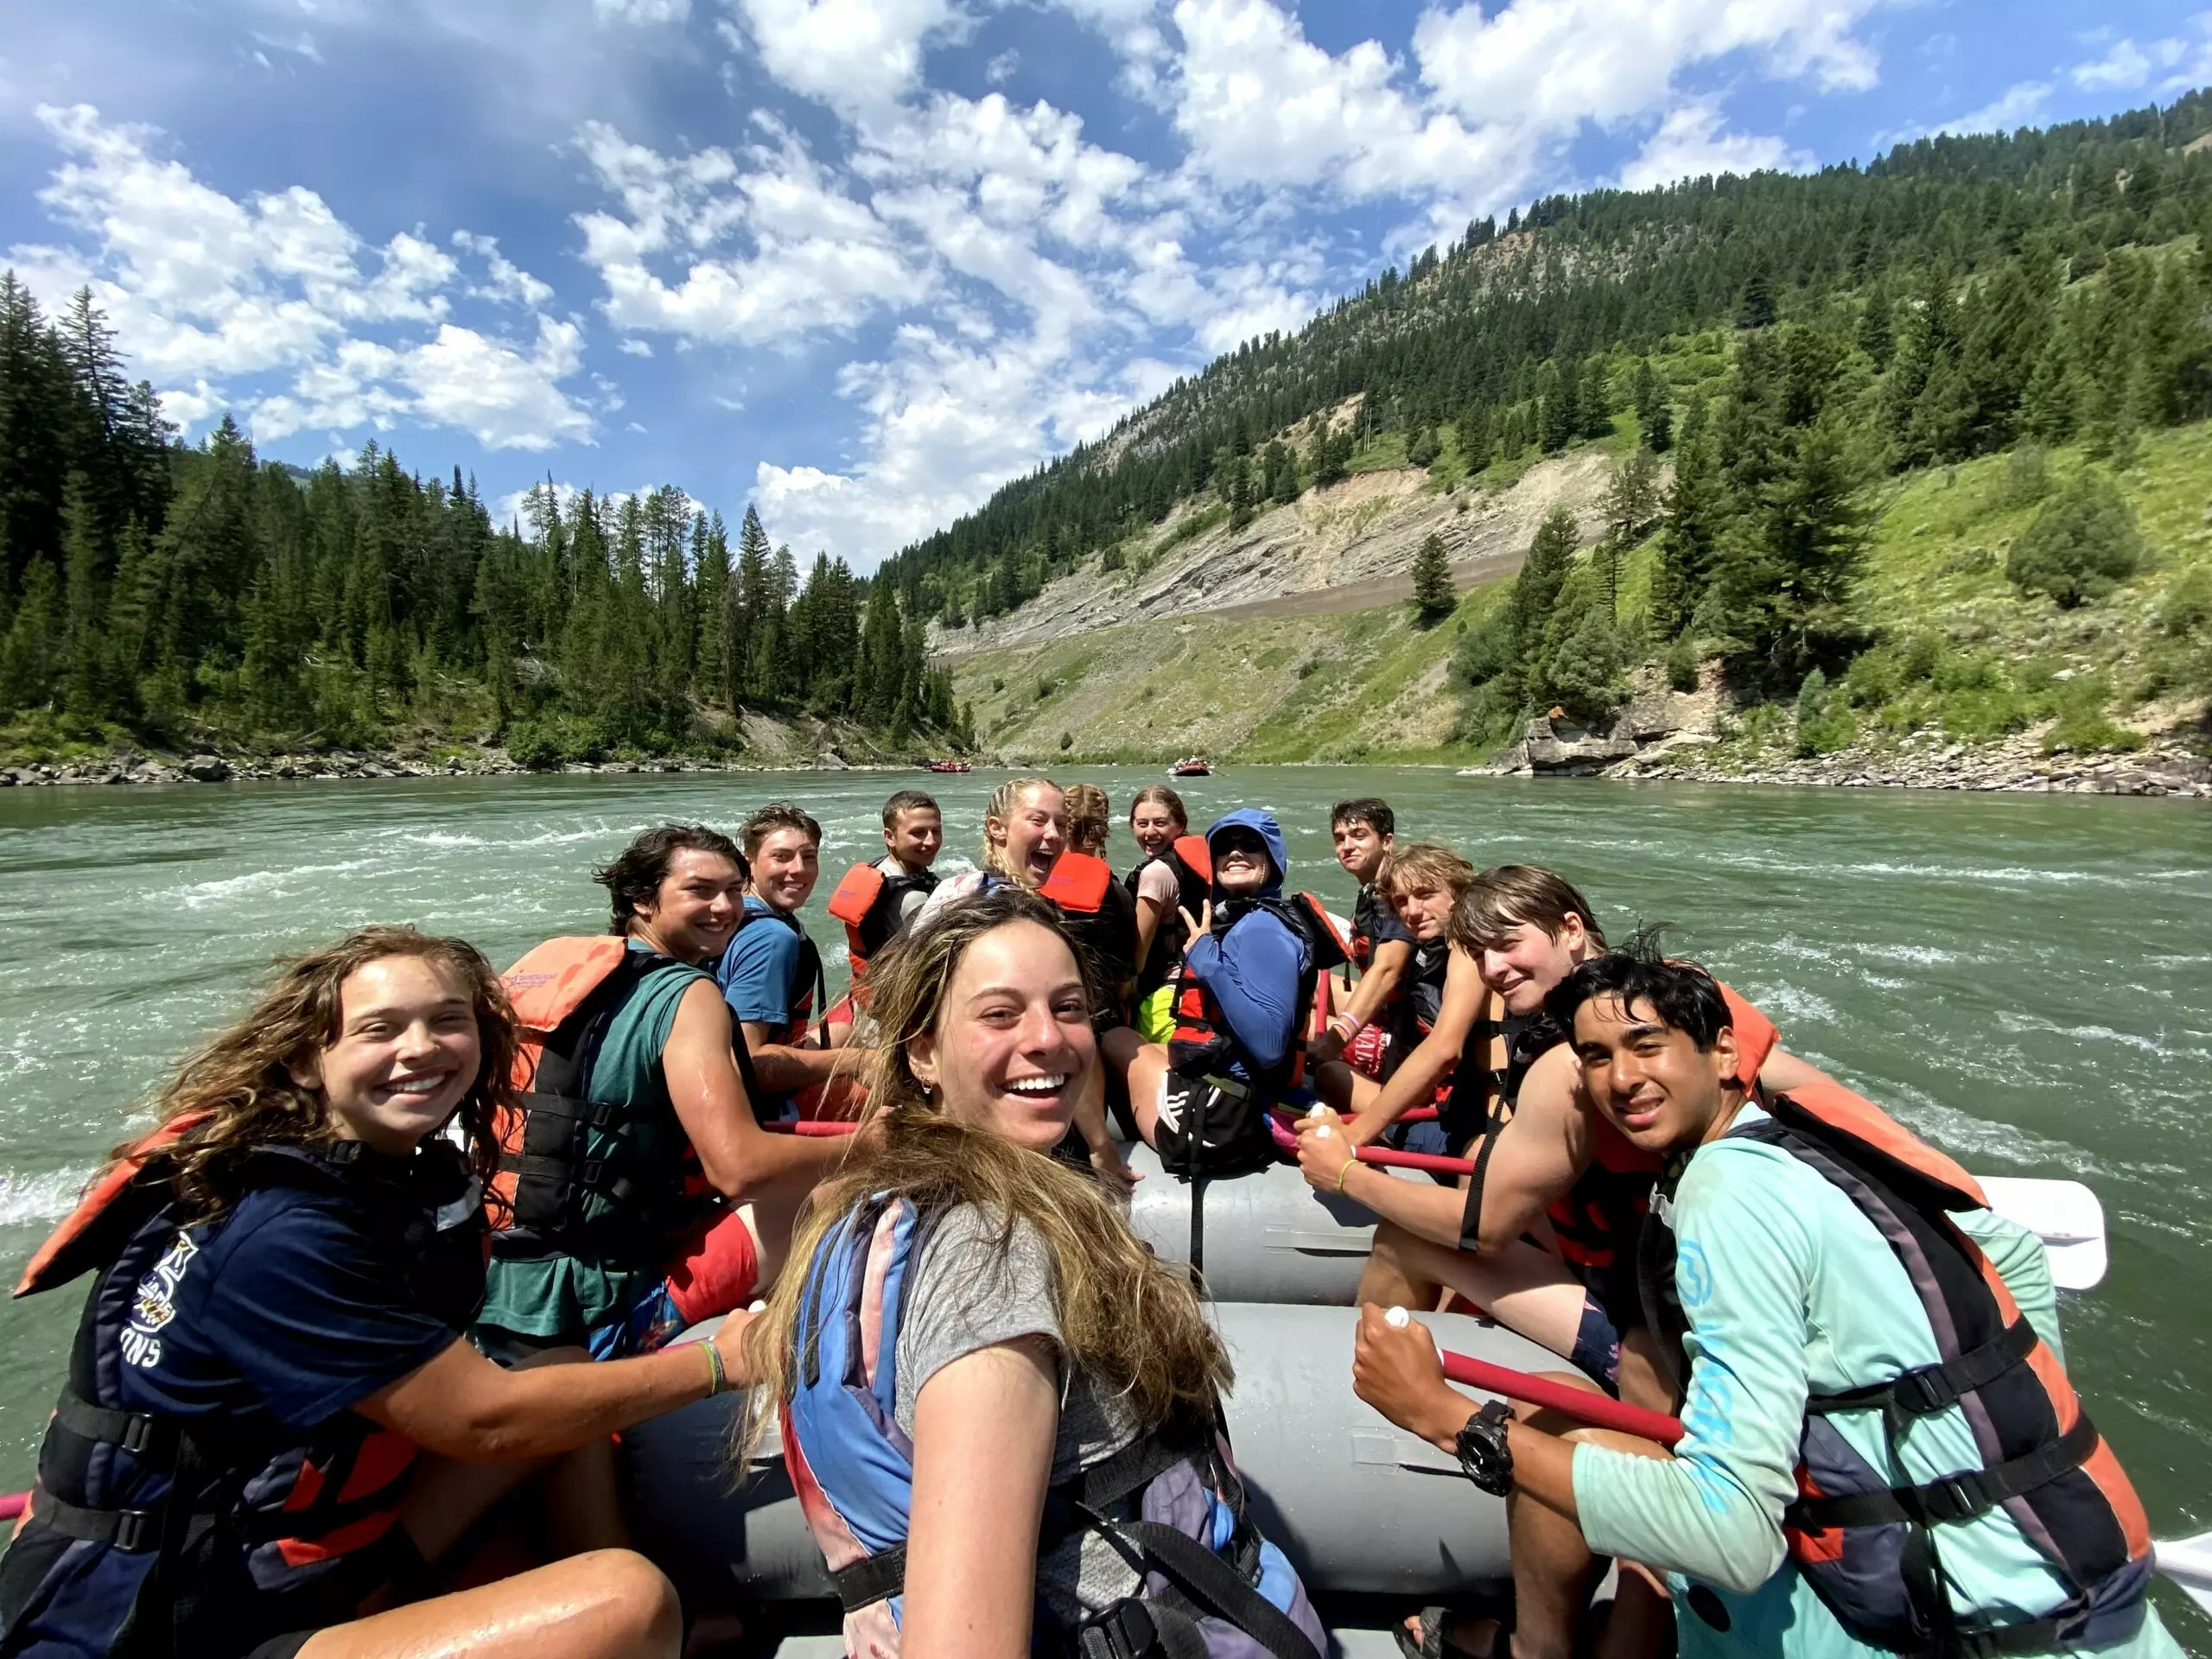 Group whitewater rafting